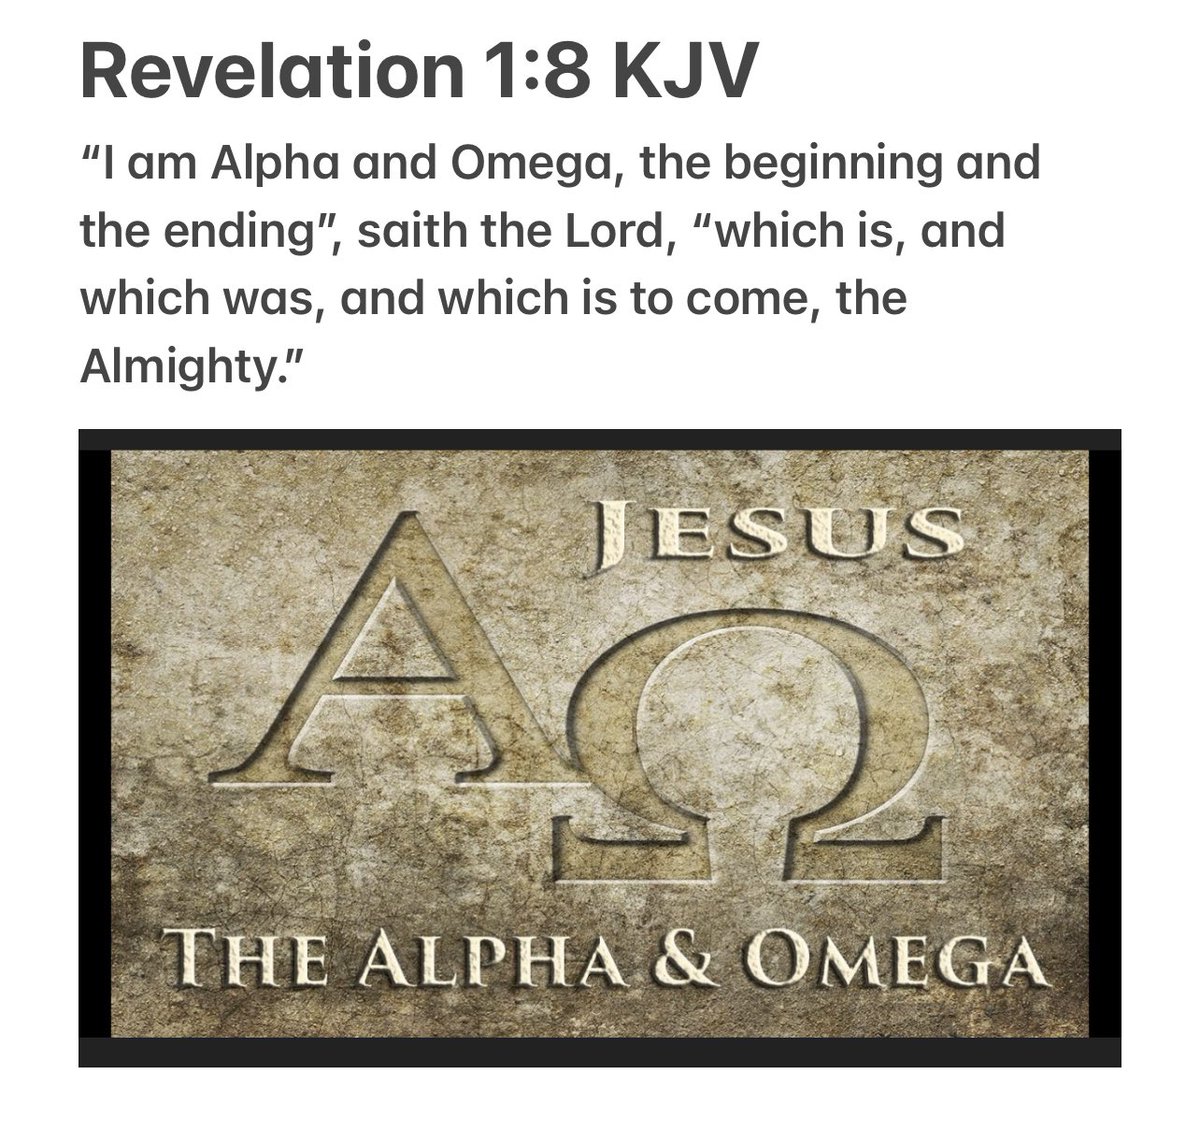 Revelation 1:7 KJV Behold, he cometh with clouds; and every eye shall see him, and they also which pierced him: and all kindreds of the earth shall wail because of him. Even so, Amen. #JesusIsLord #Believe